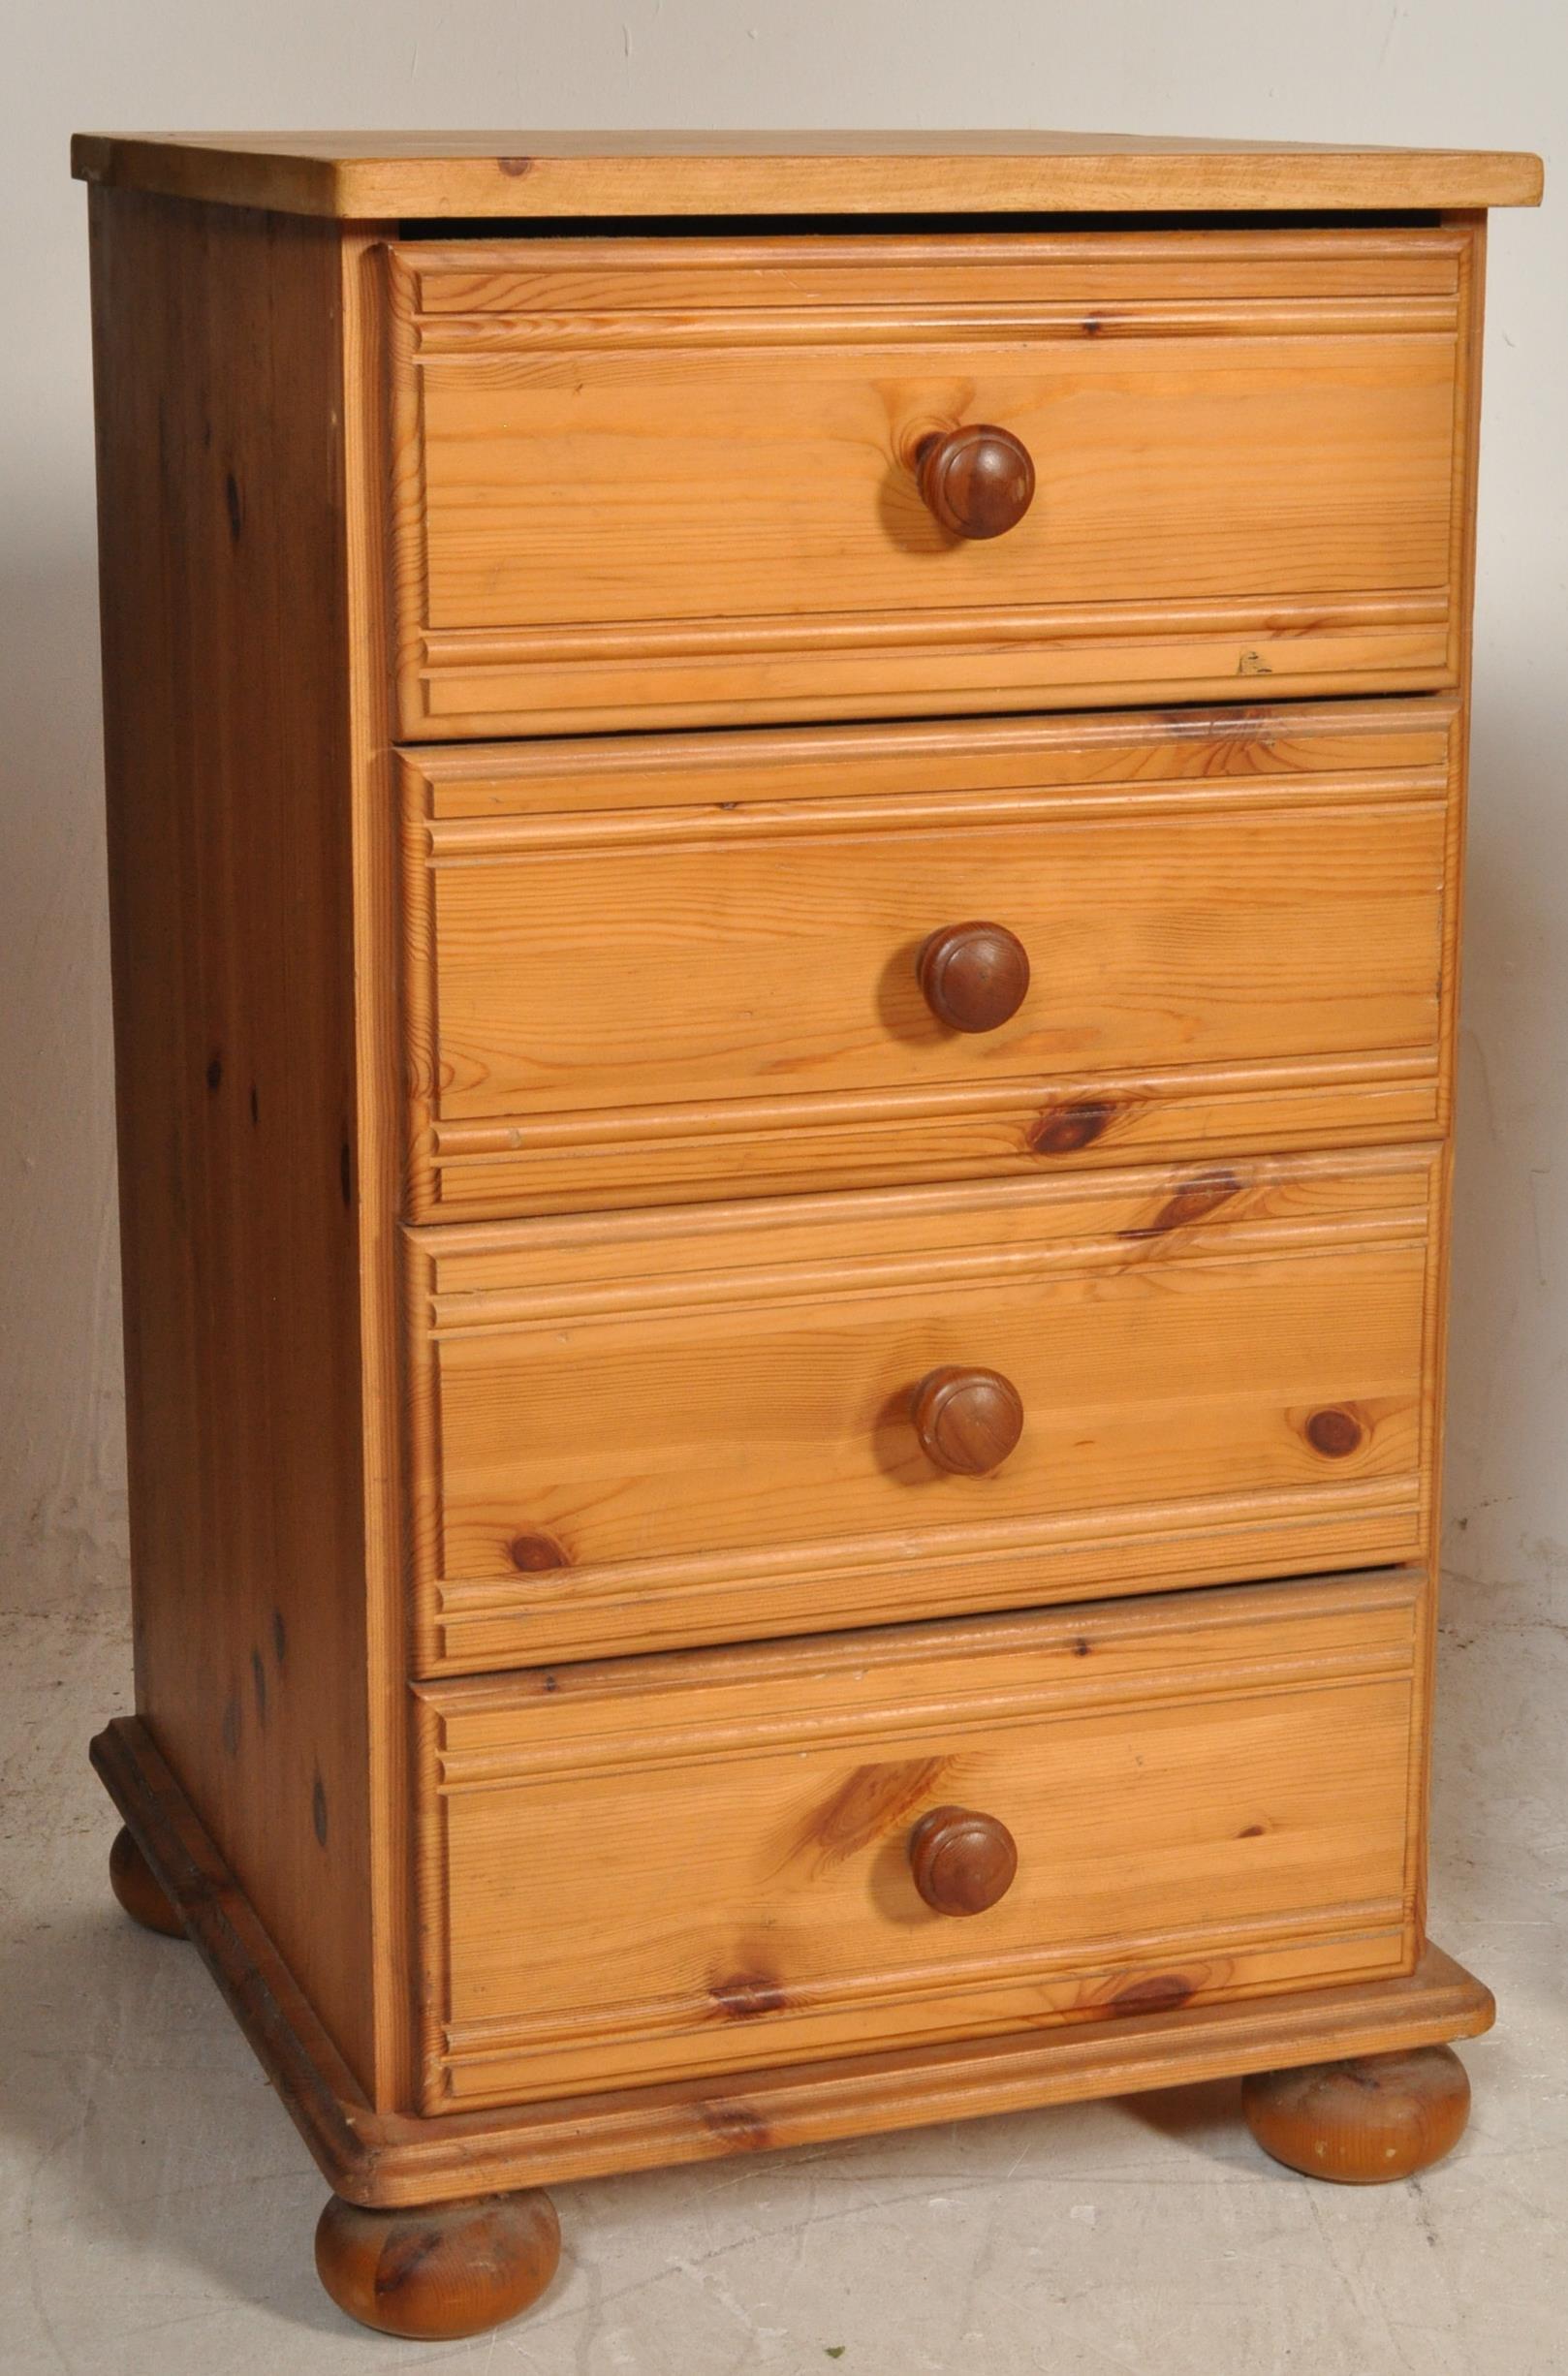 A COUNTRY PINE VICTORIAN STYLE BEDSIDE CHEST AND CUPBOARD - Image 2 of 6